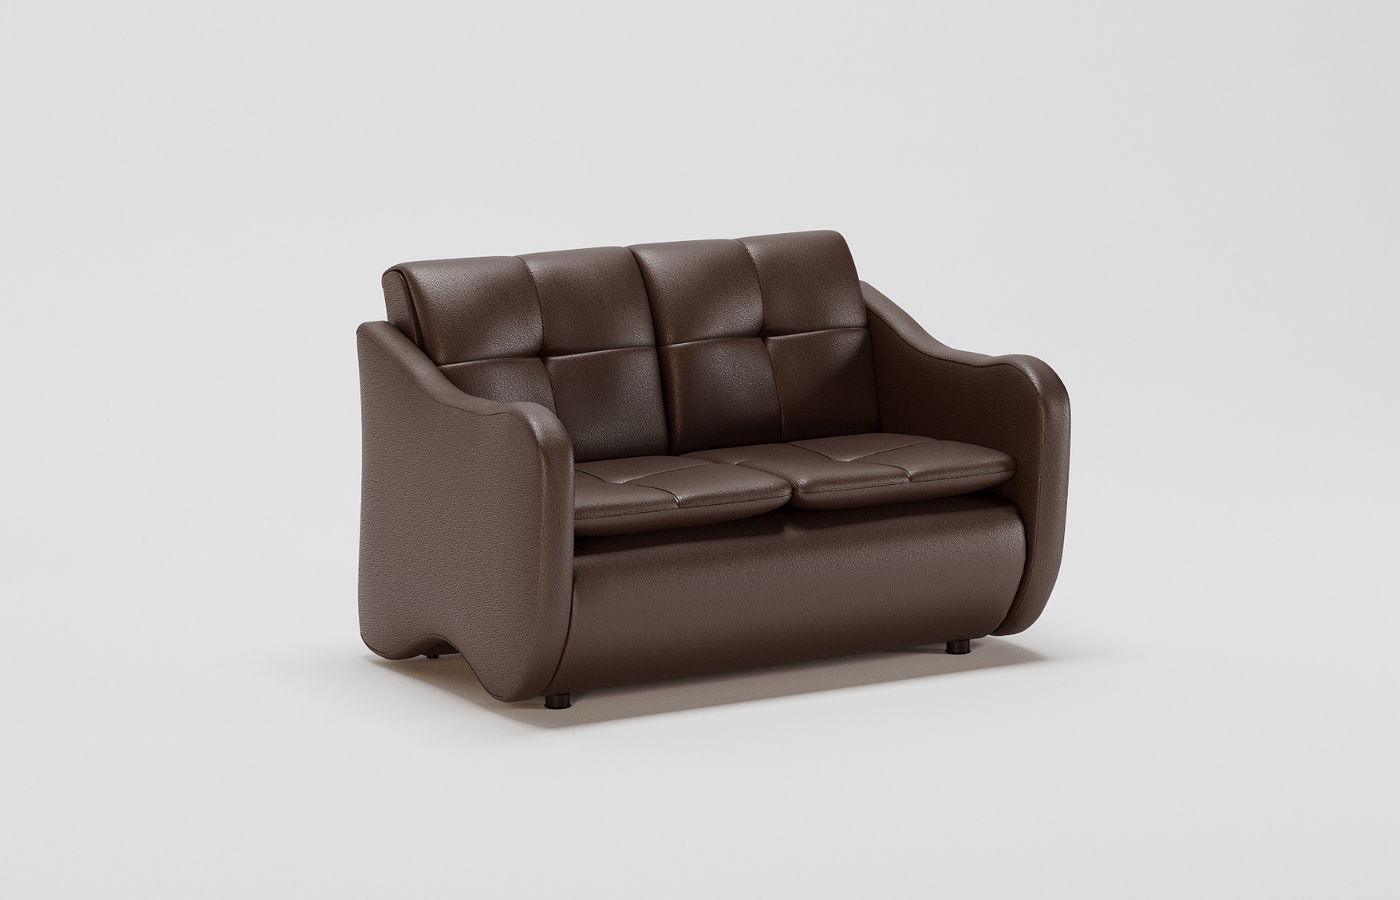 Delight plus sofa with arms two seater